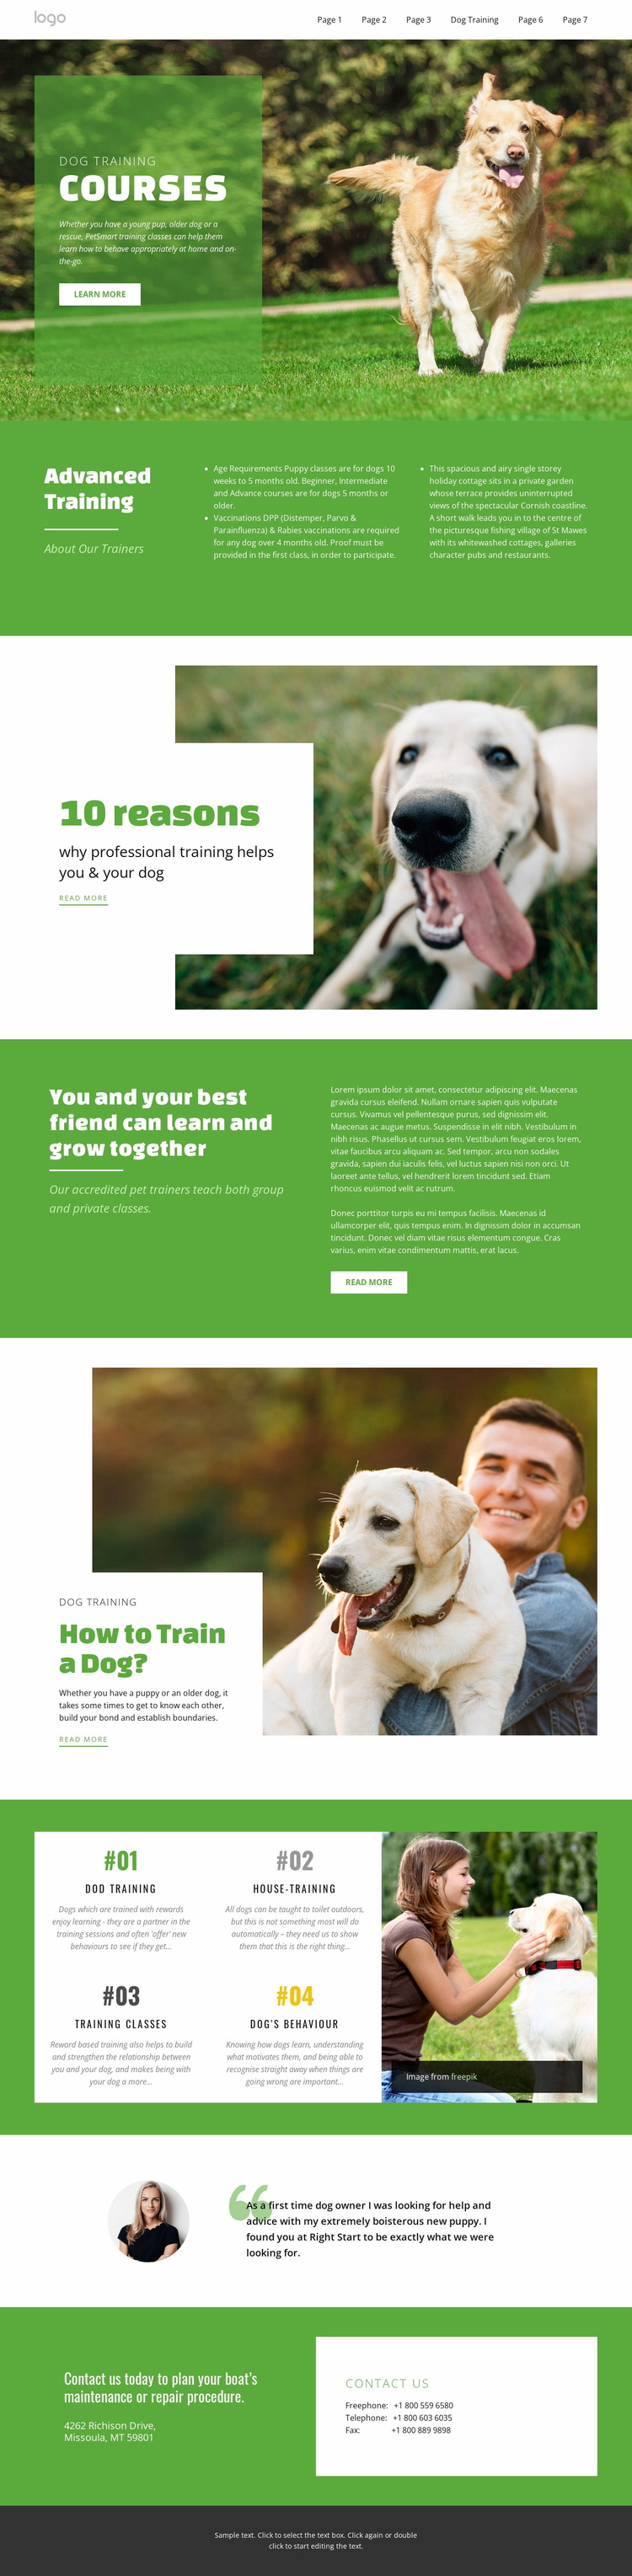 Training courses for pets Website Template